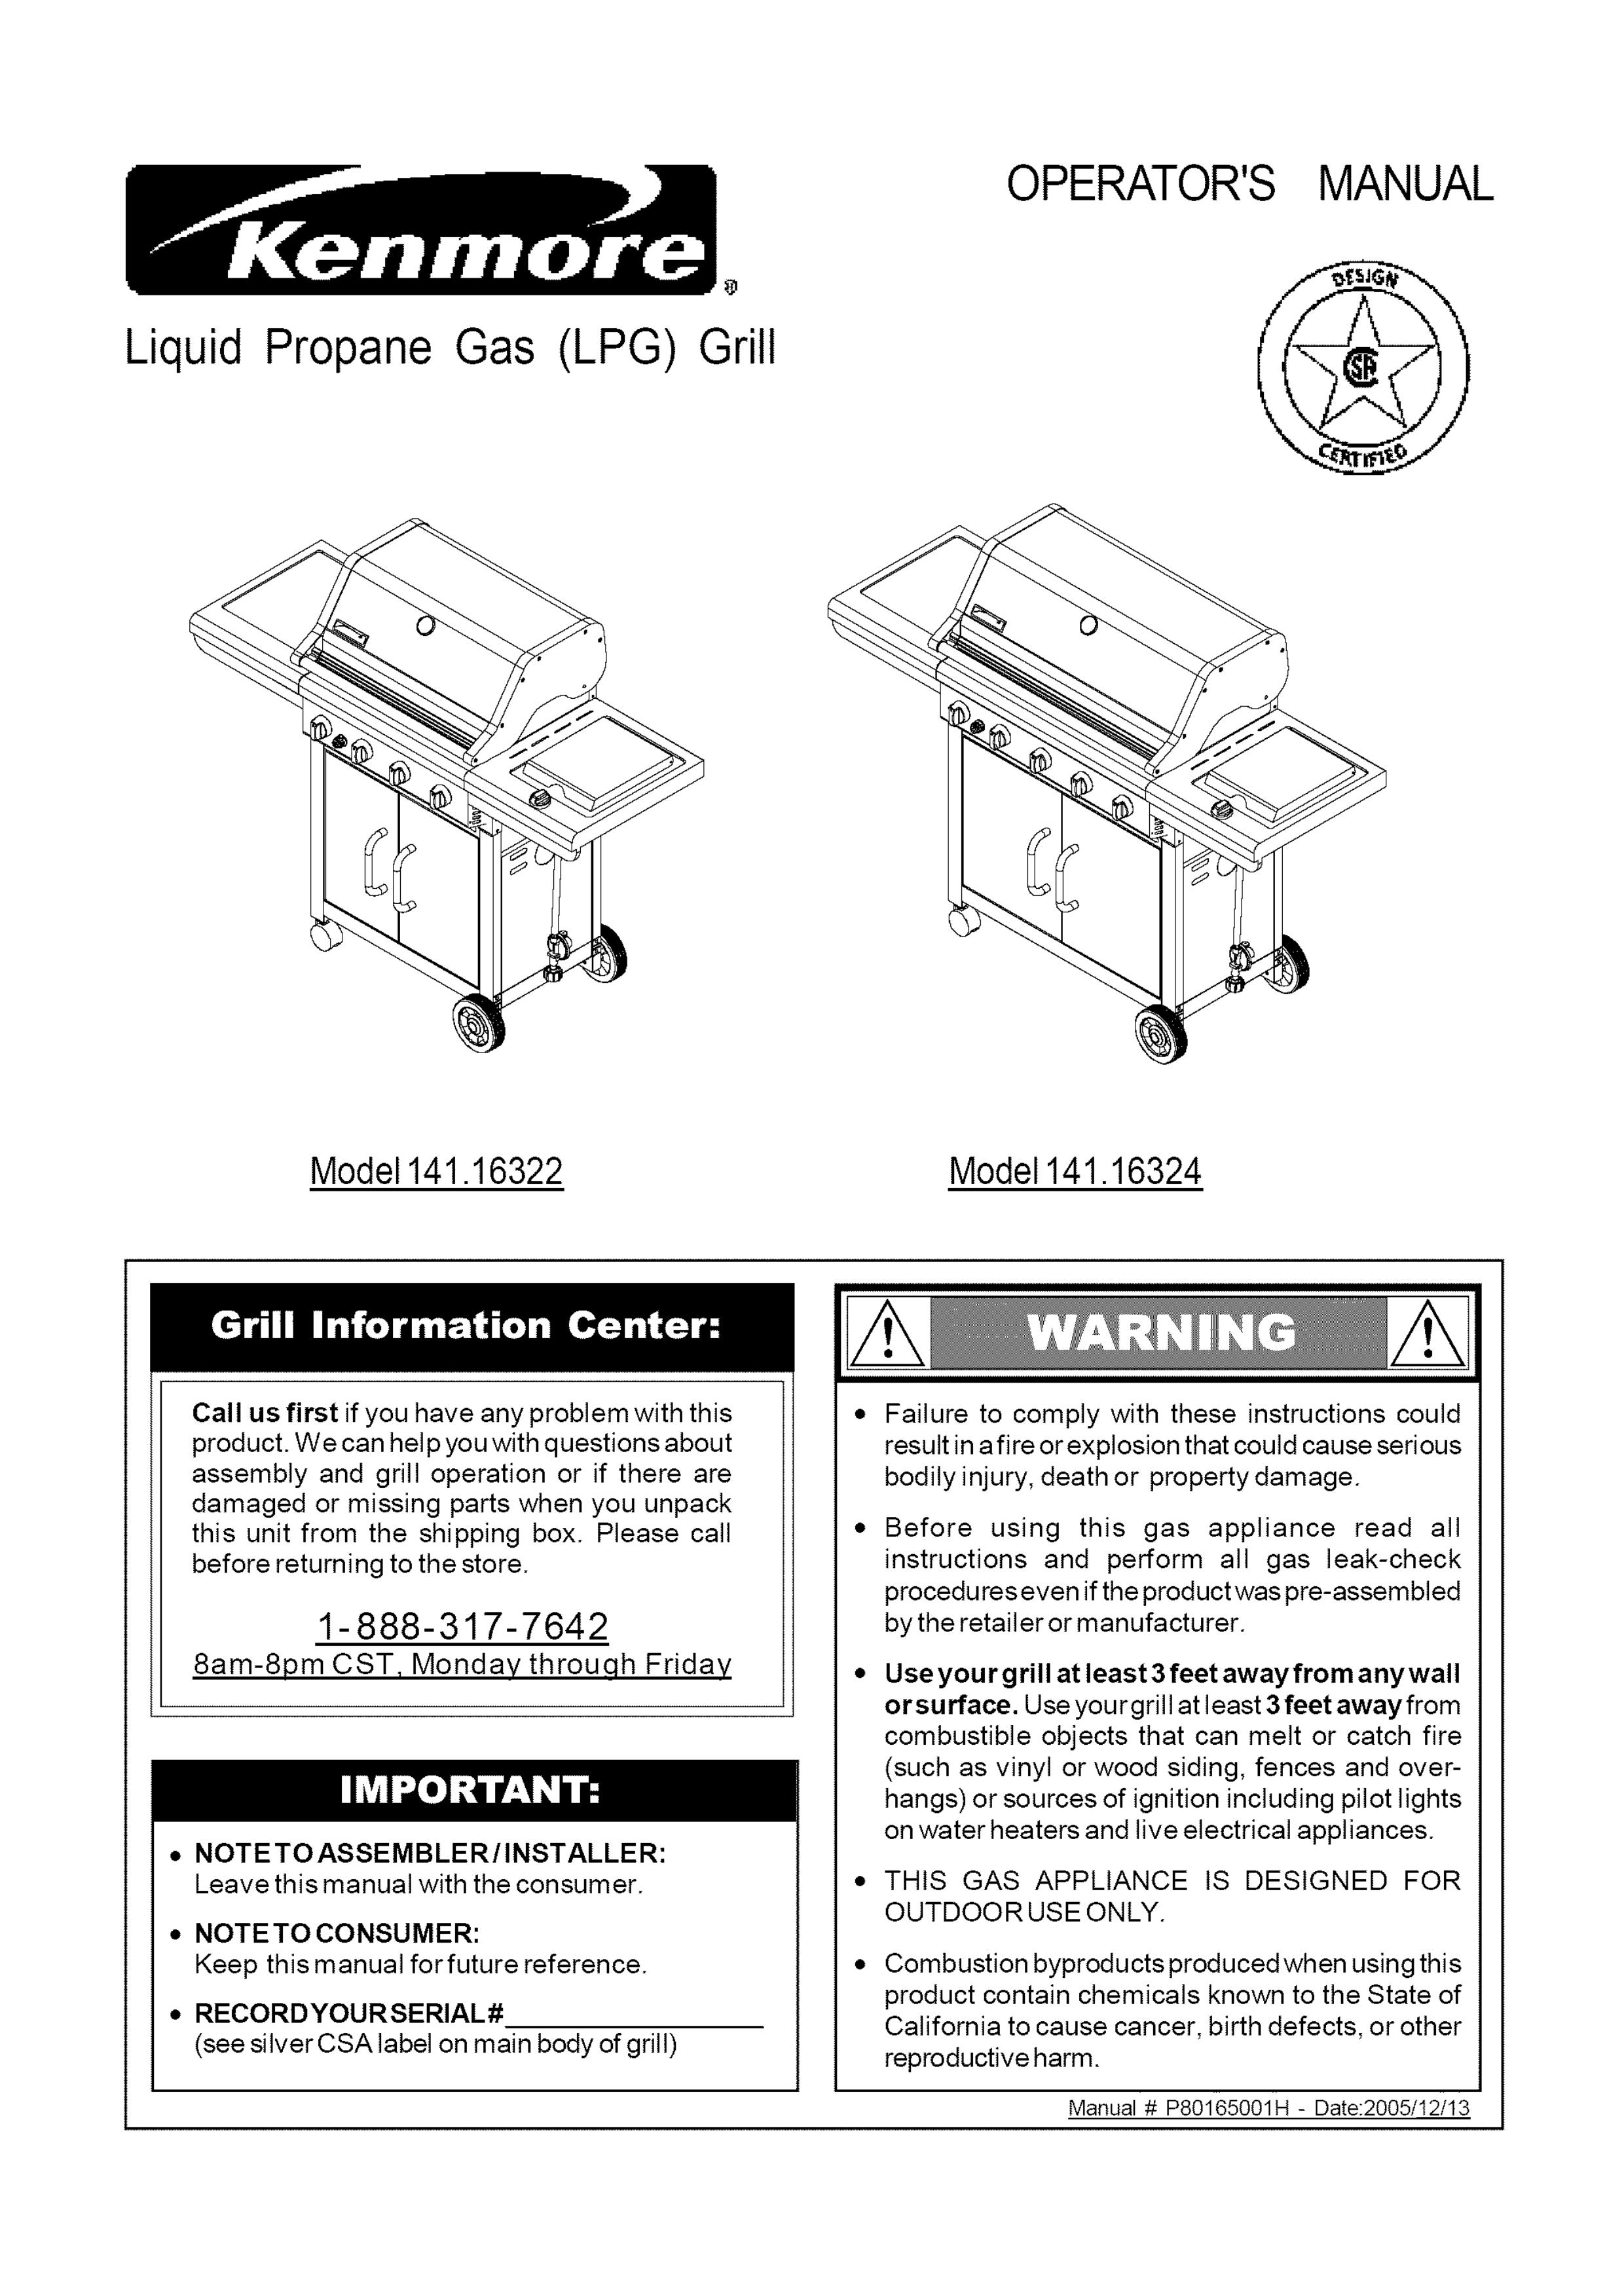 Kenmore 141.16324 Gas Grill User Manual